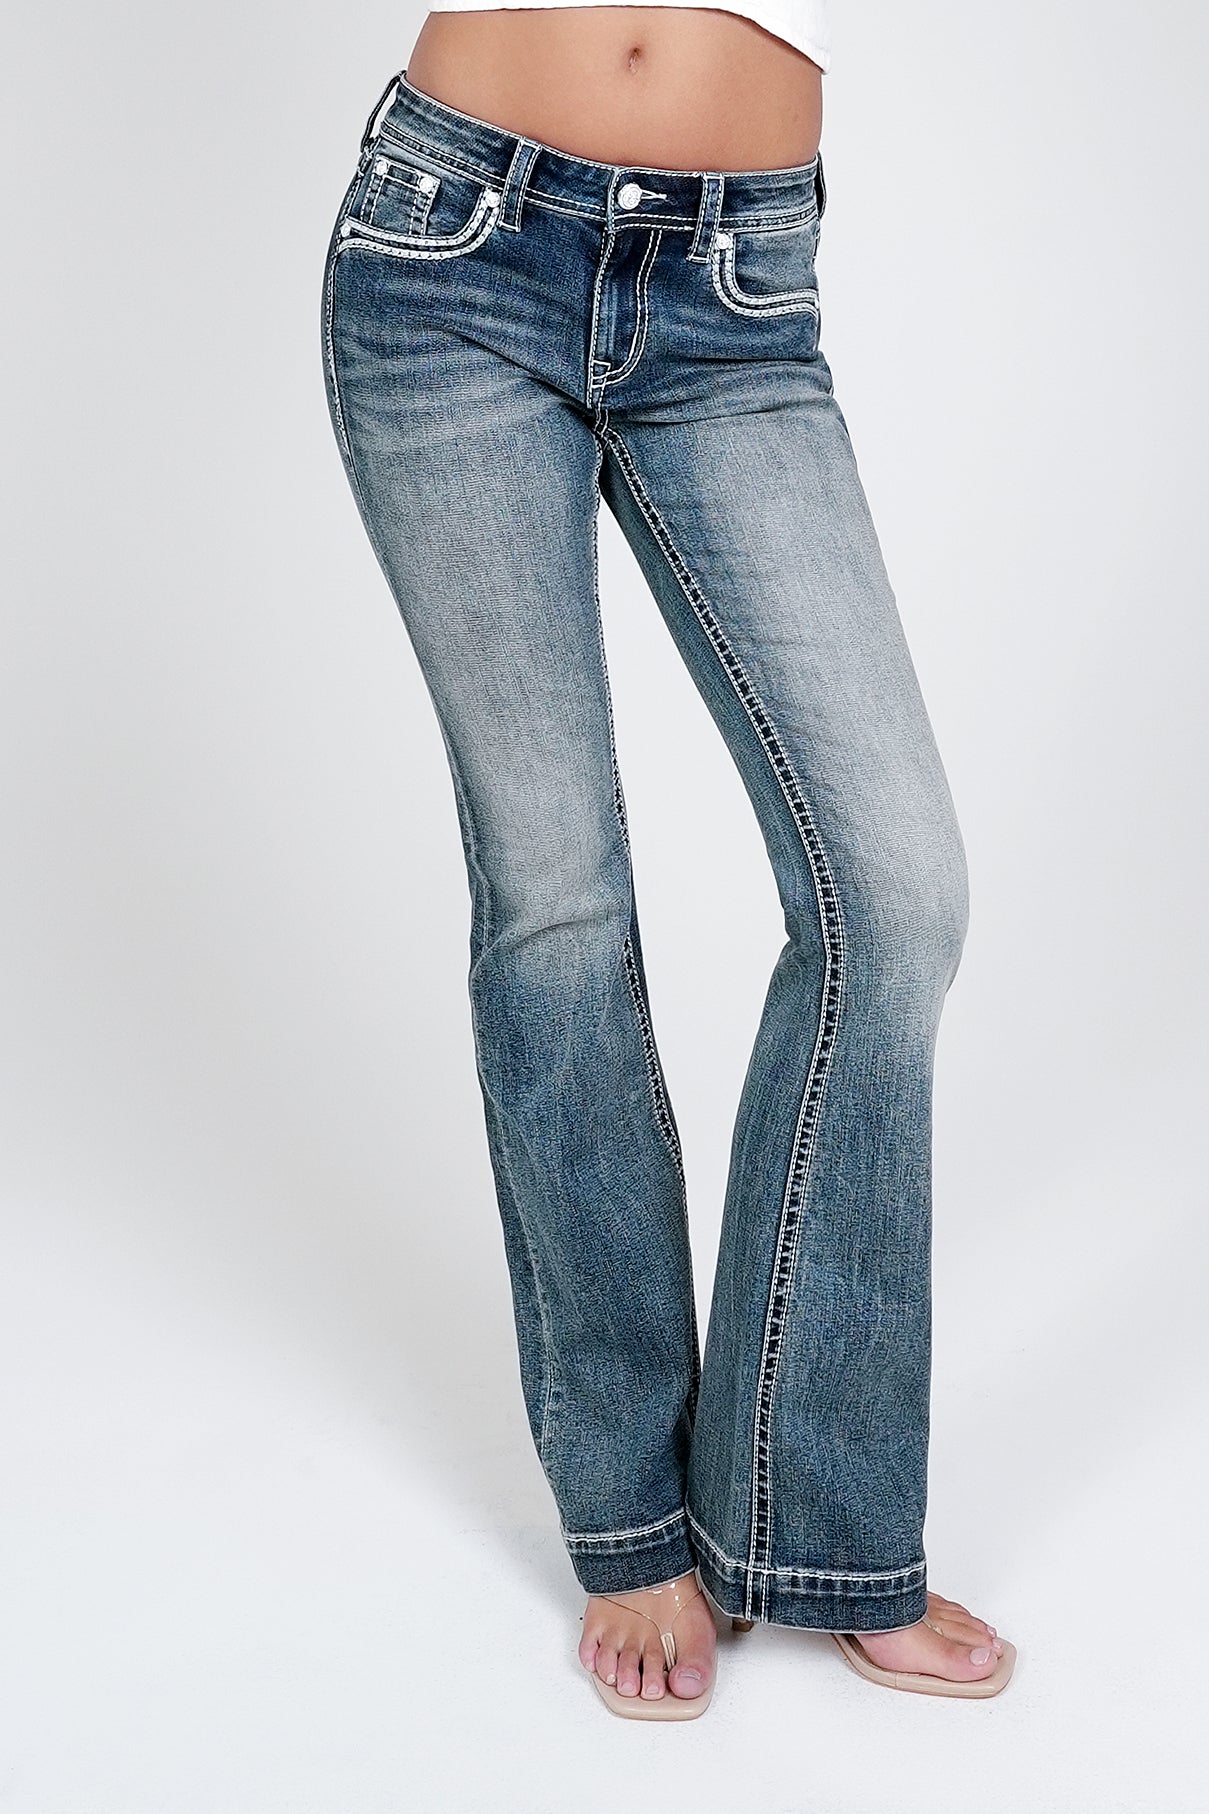 Horns Modify Horse hide Trims Embellished Mid Rise Bootcut Jeans